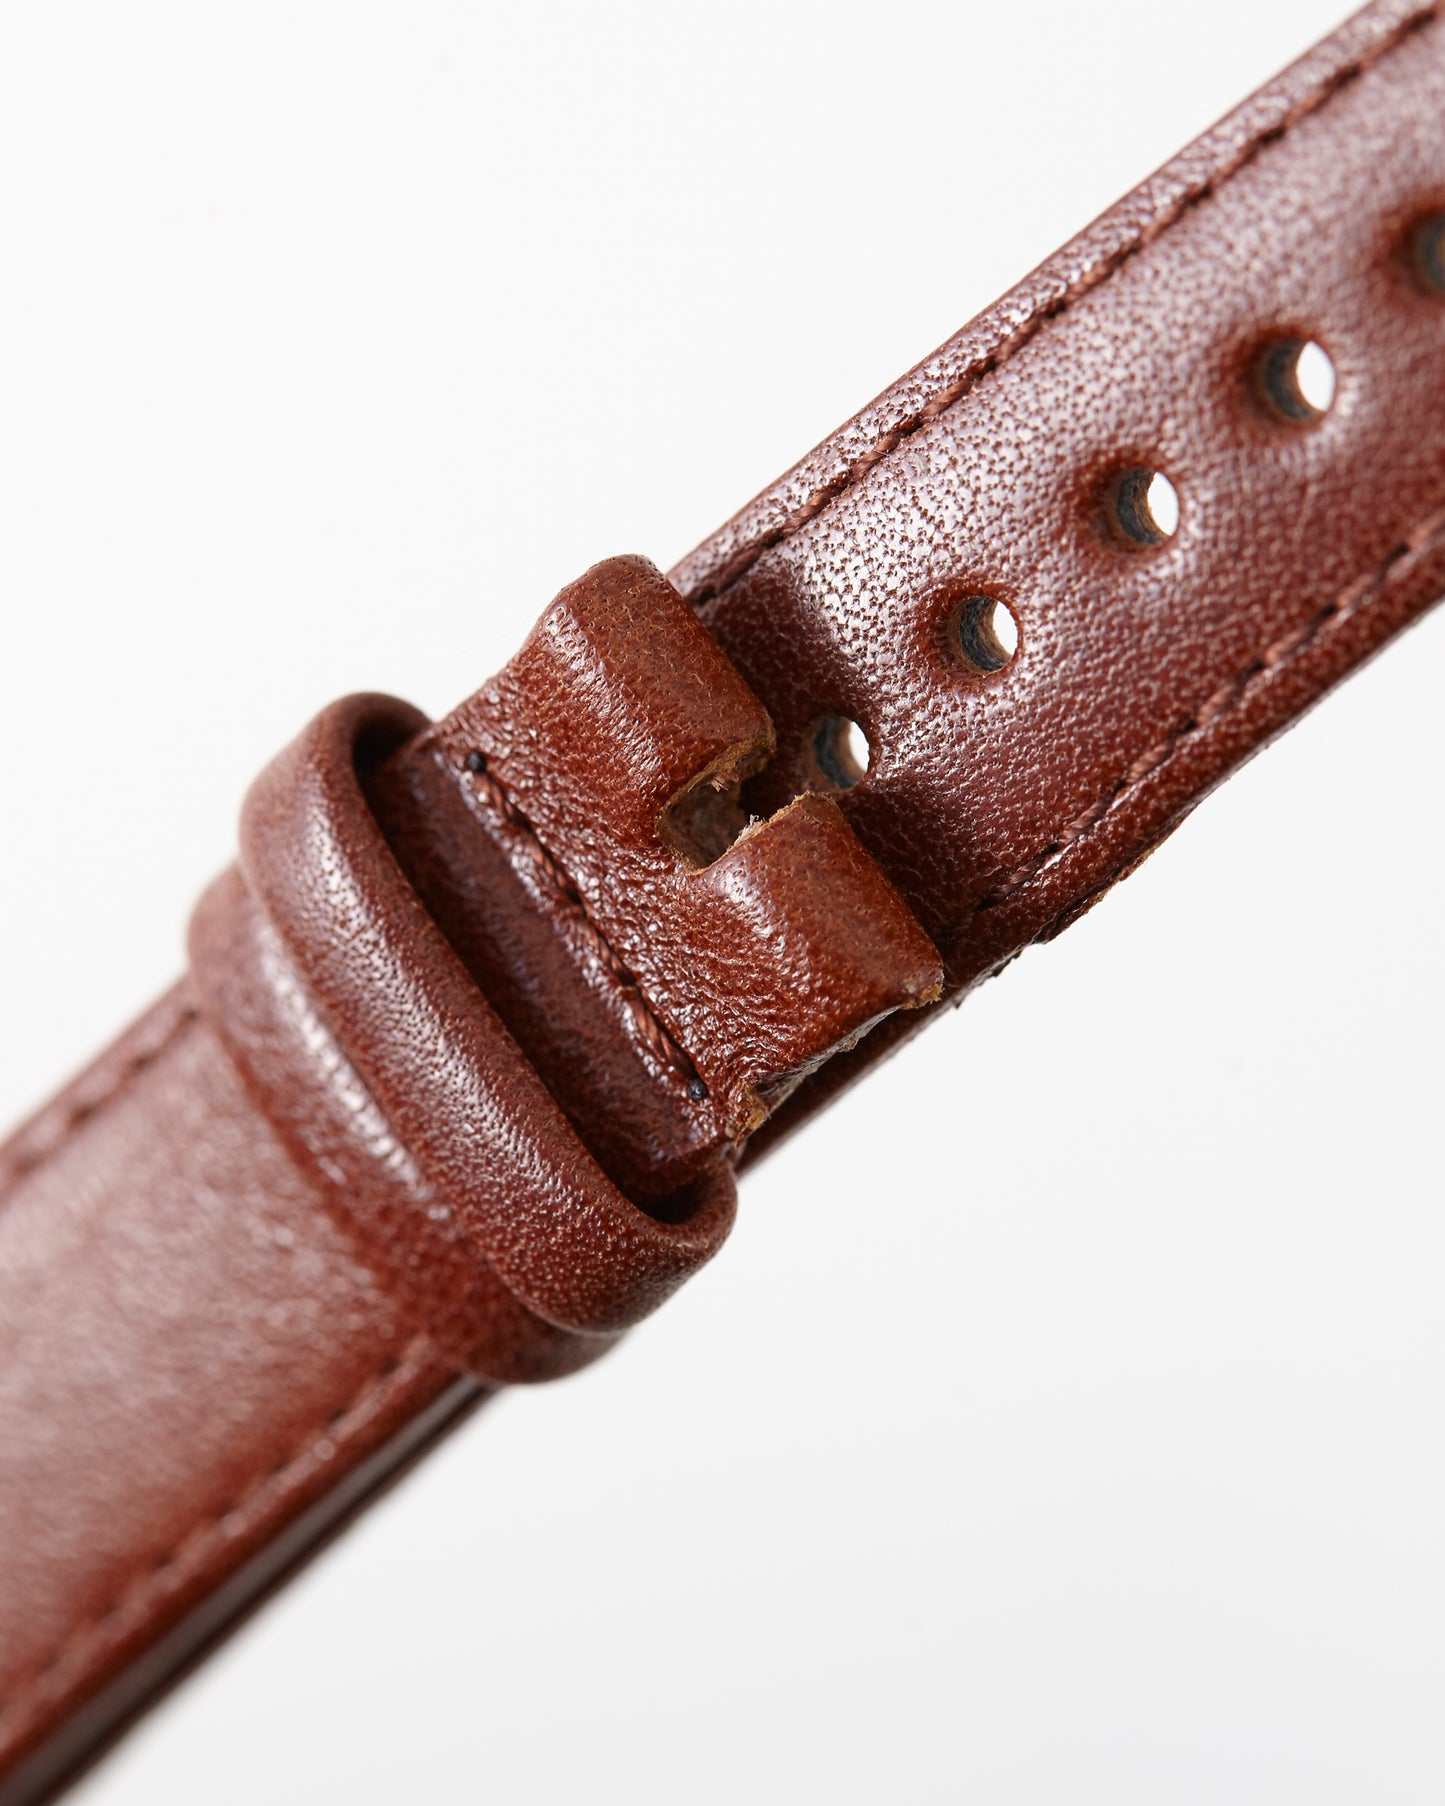 Ecclissi 14mm x 14mm Notched Brown Leather Strap 22590